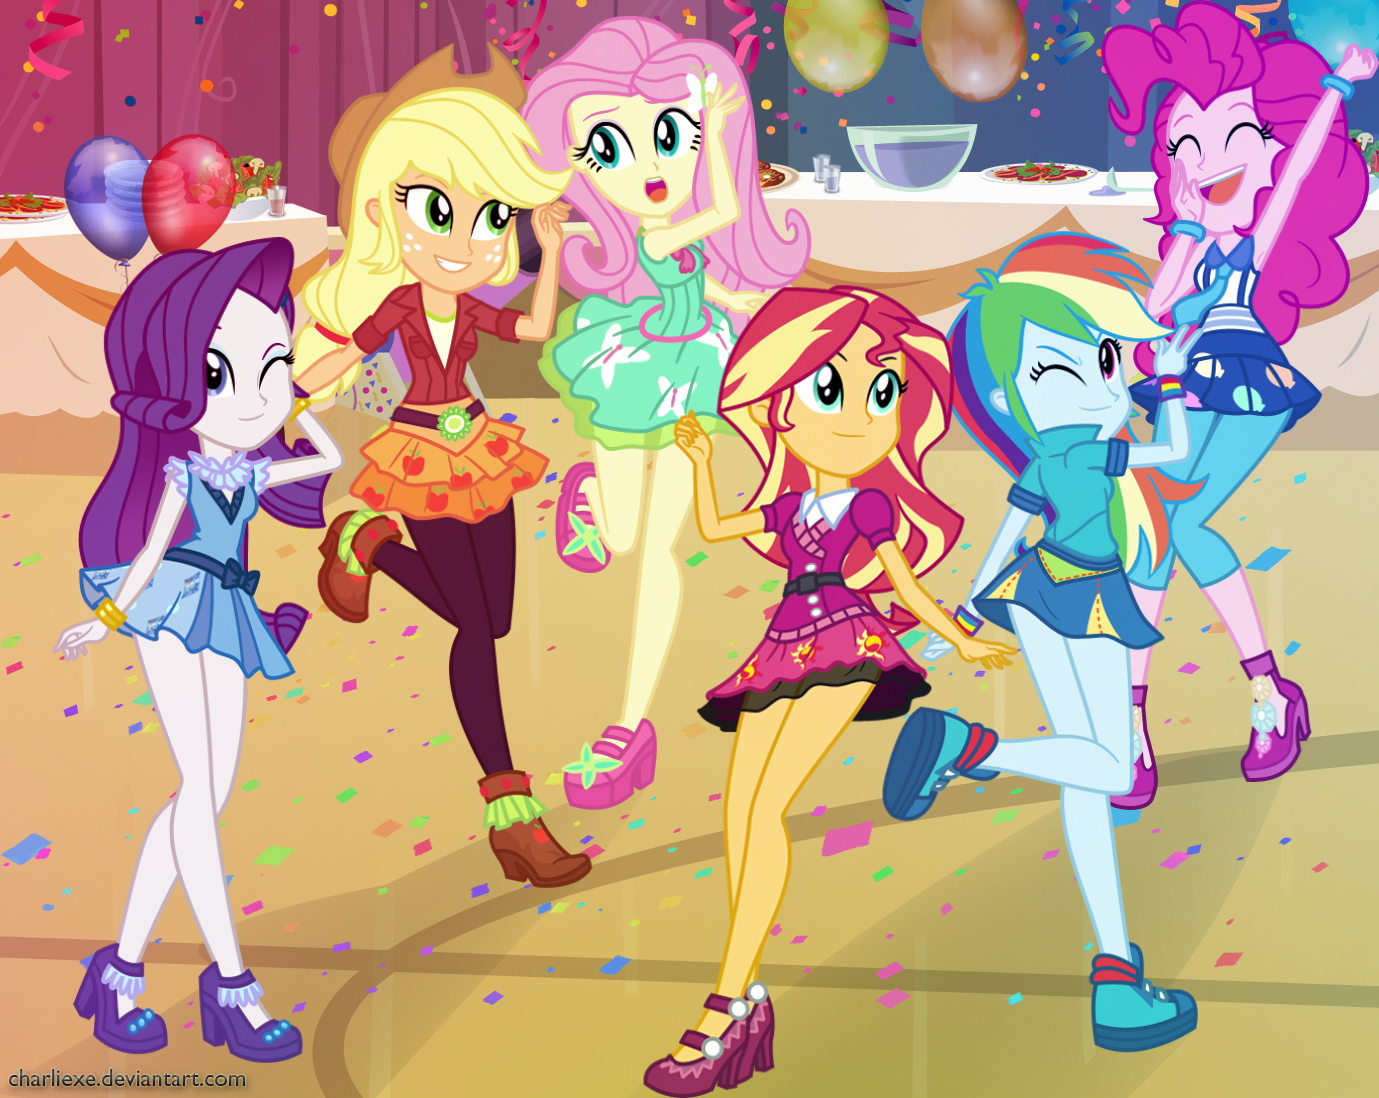 My Little Pony: Equestria Girls - Friendship Games Art by charliexe